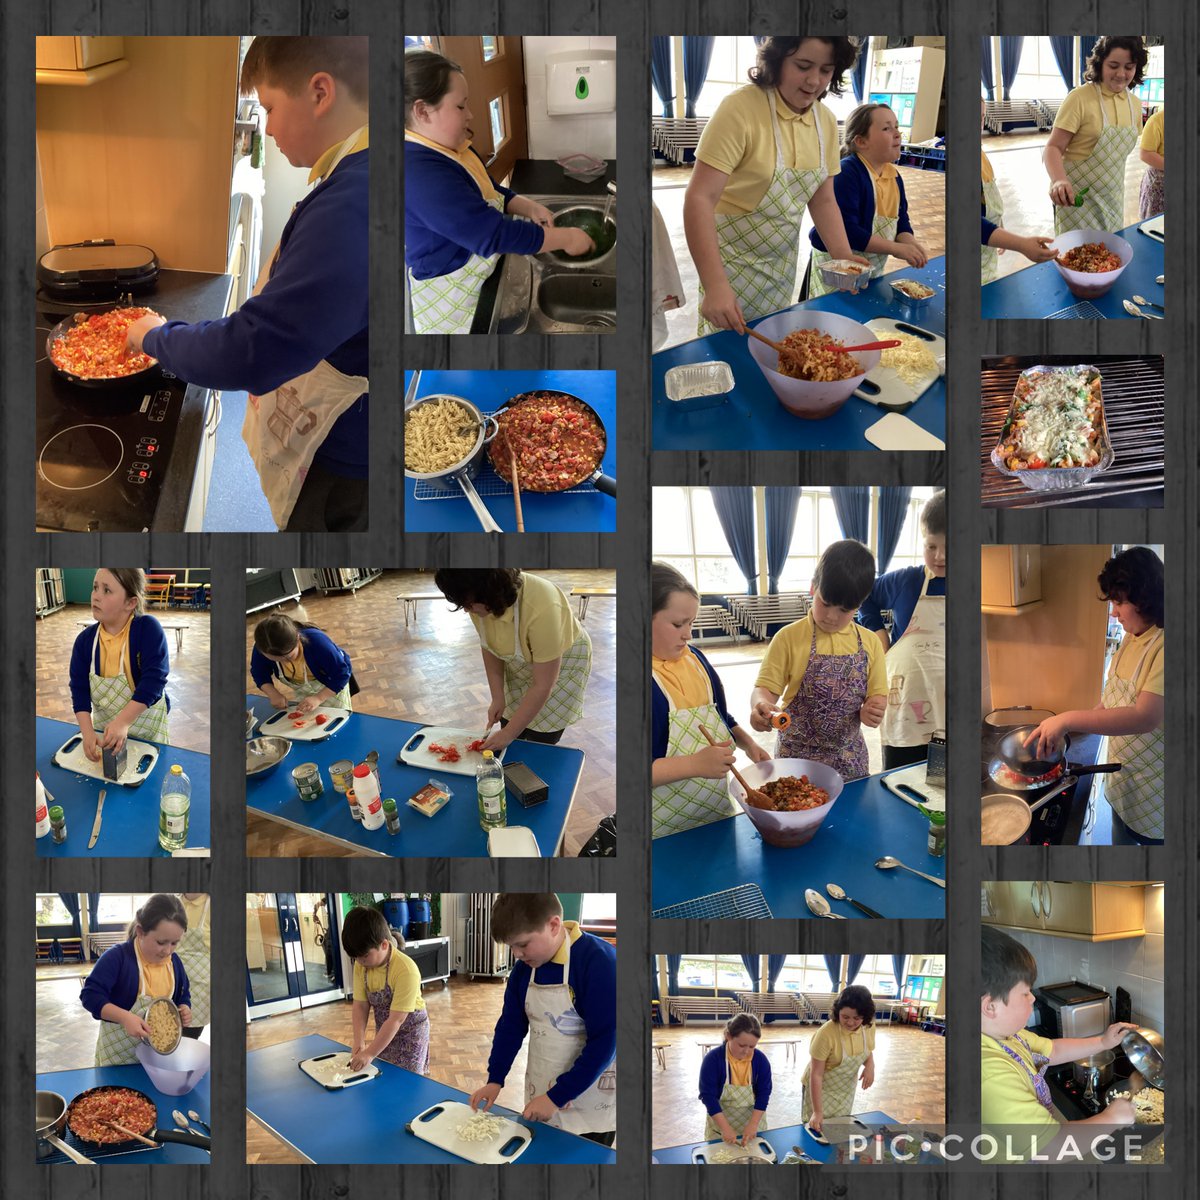 Karen's Cooking Club. We had such a lovely time yesterday making tuna pasta bake.